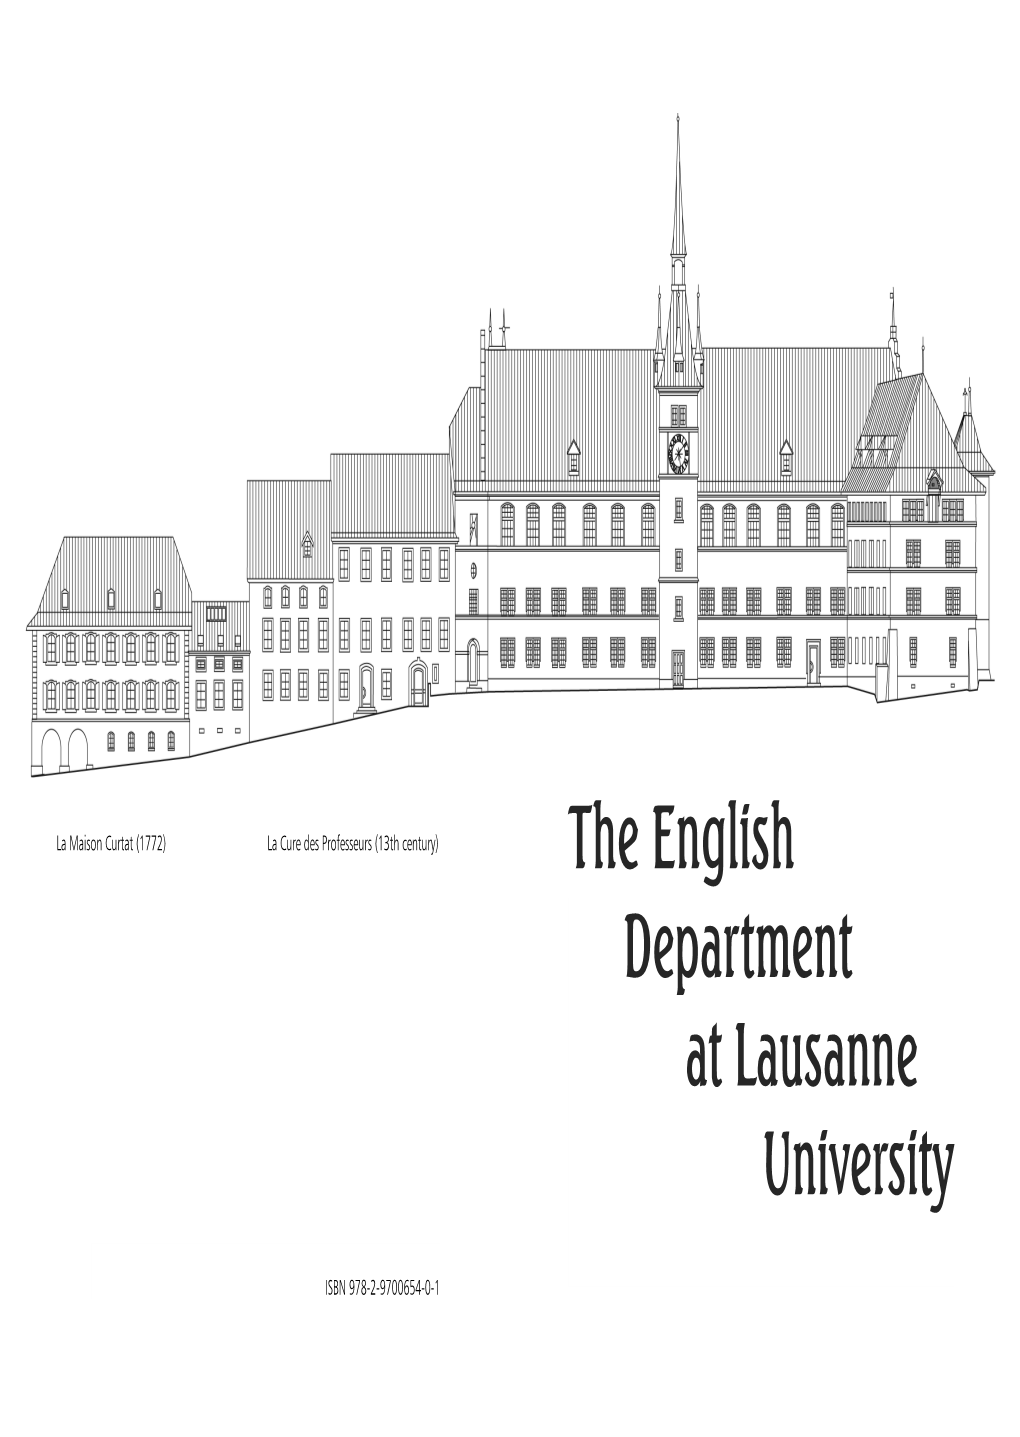 The English Department at Lausanne University